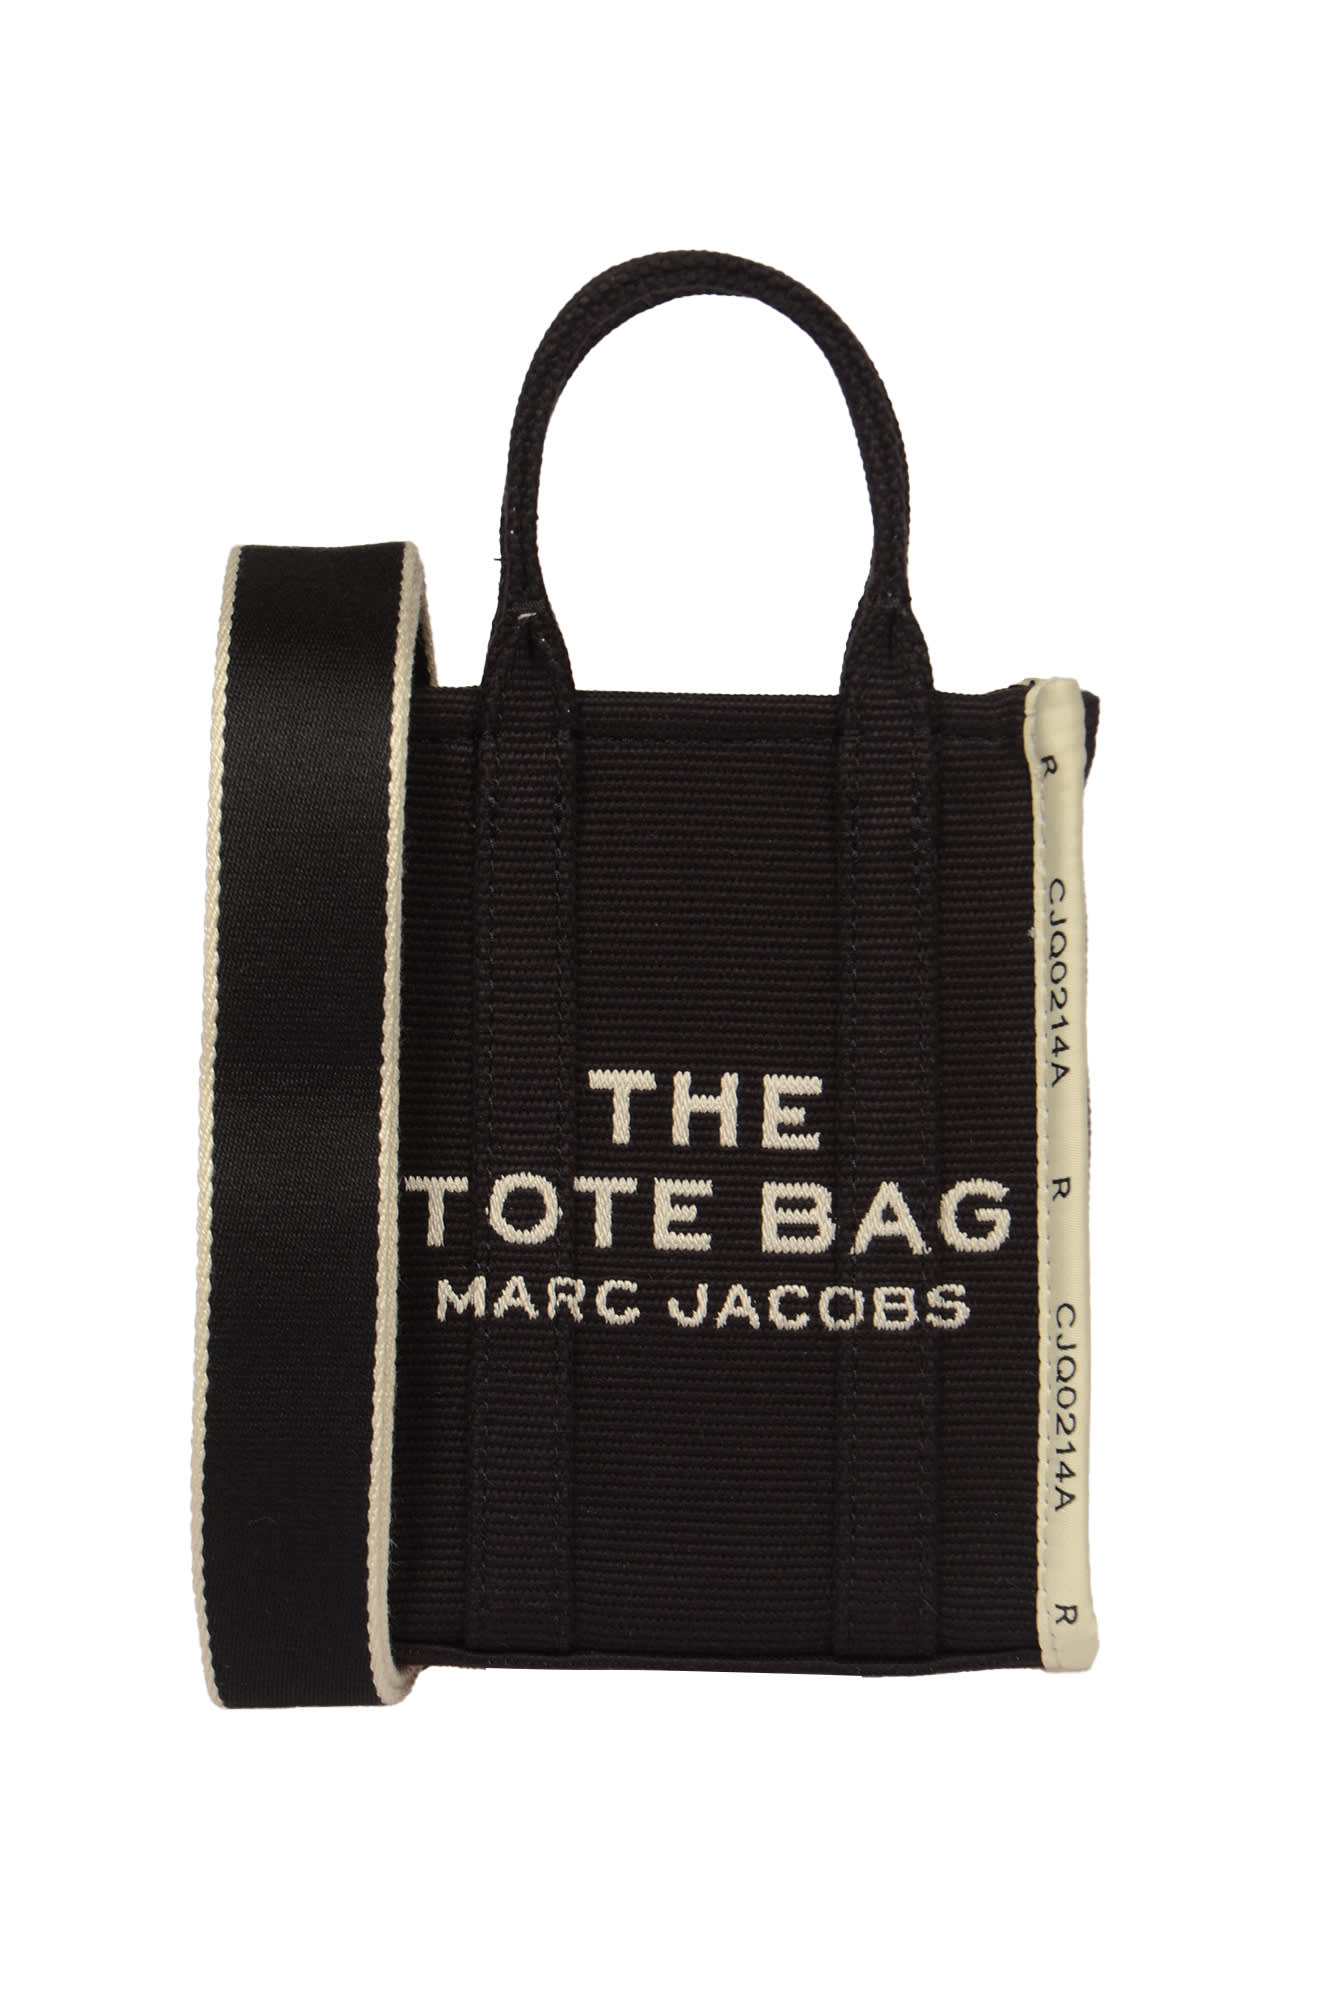 Marc Jacobs The Tote Bag Tote In Black